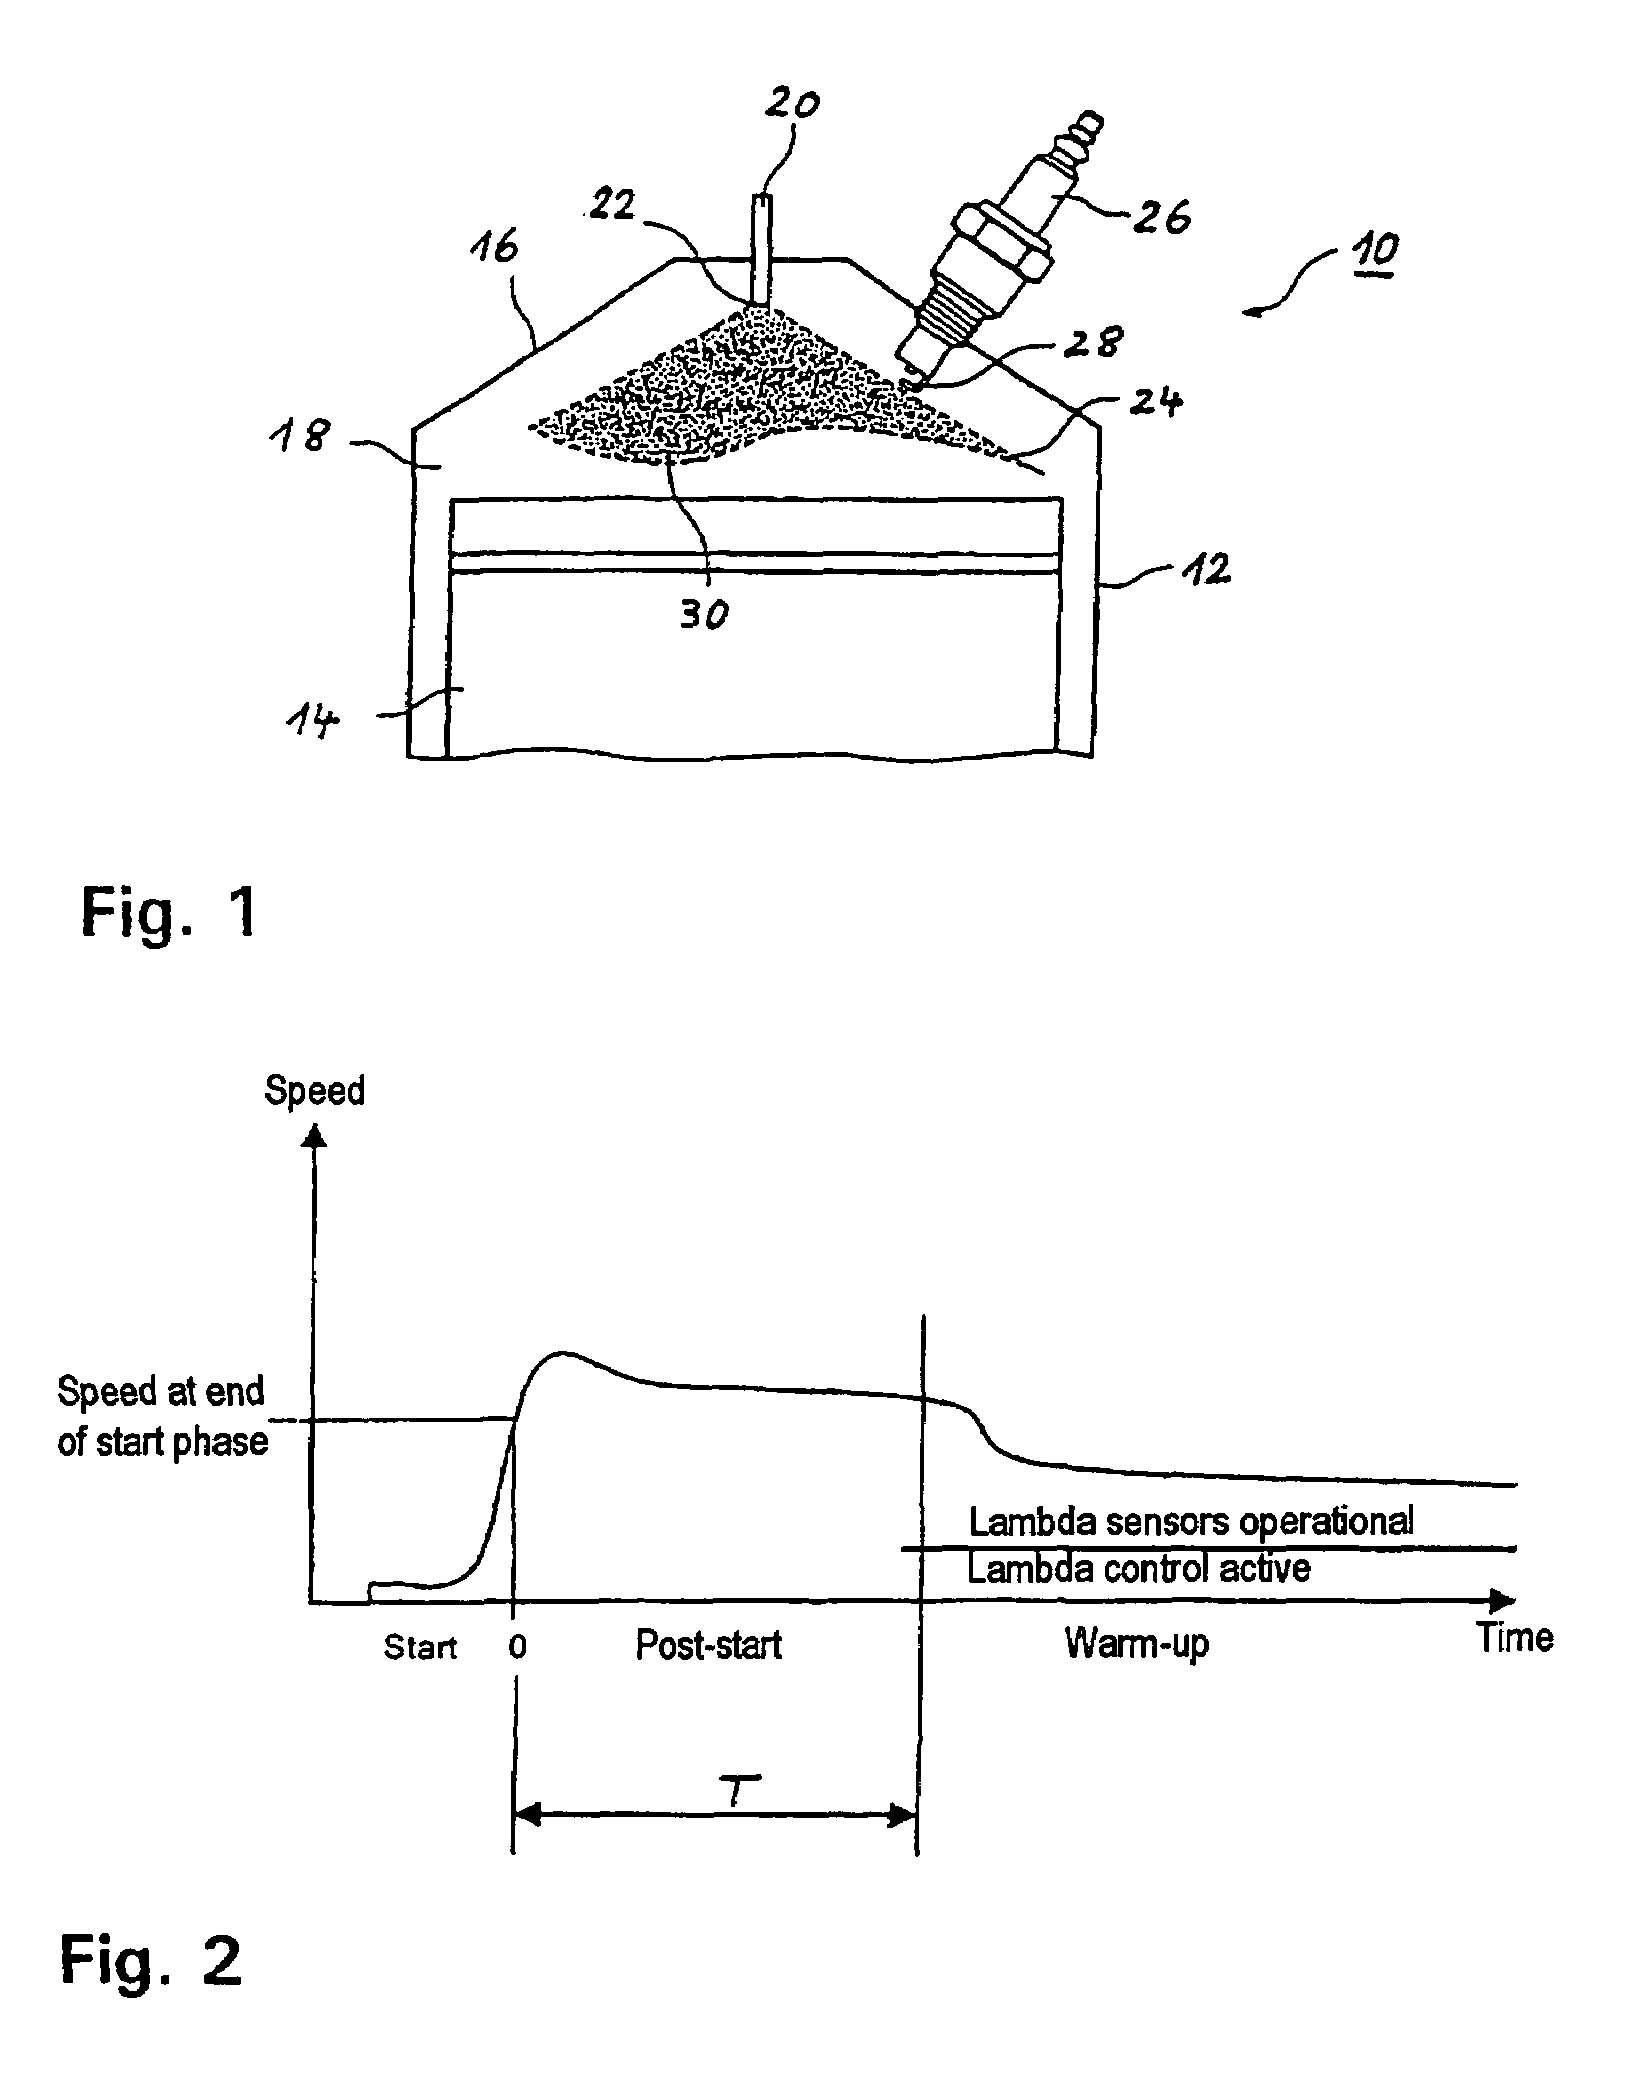 Method for operating an internal combustion engine with direct fuel injection during a post-start phase